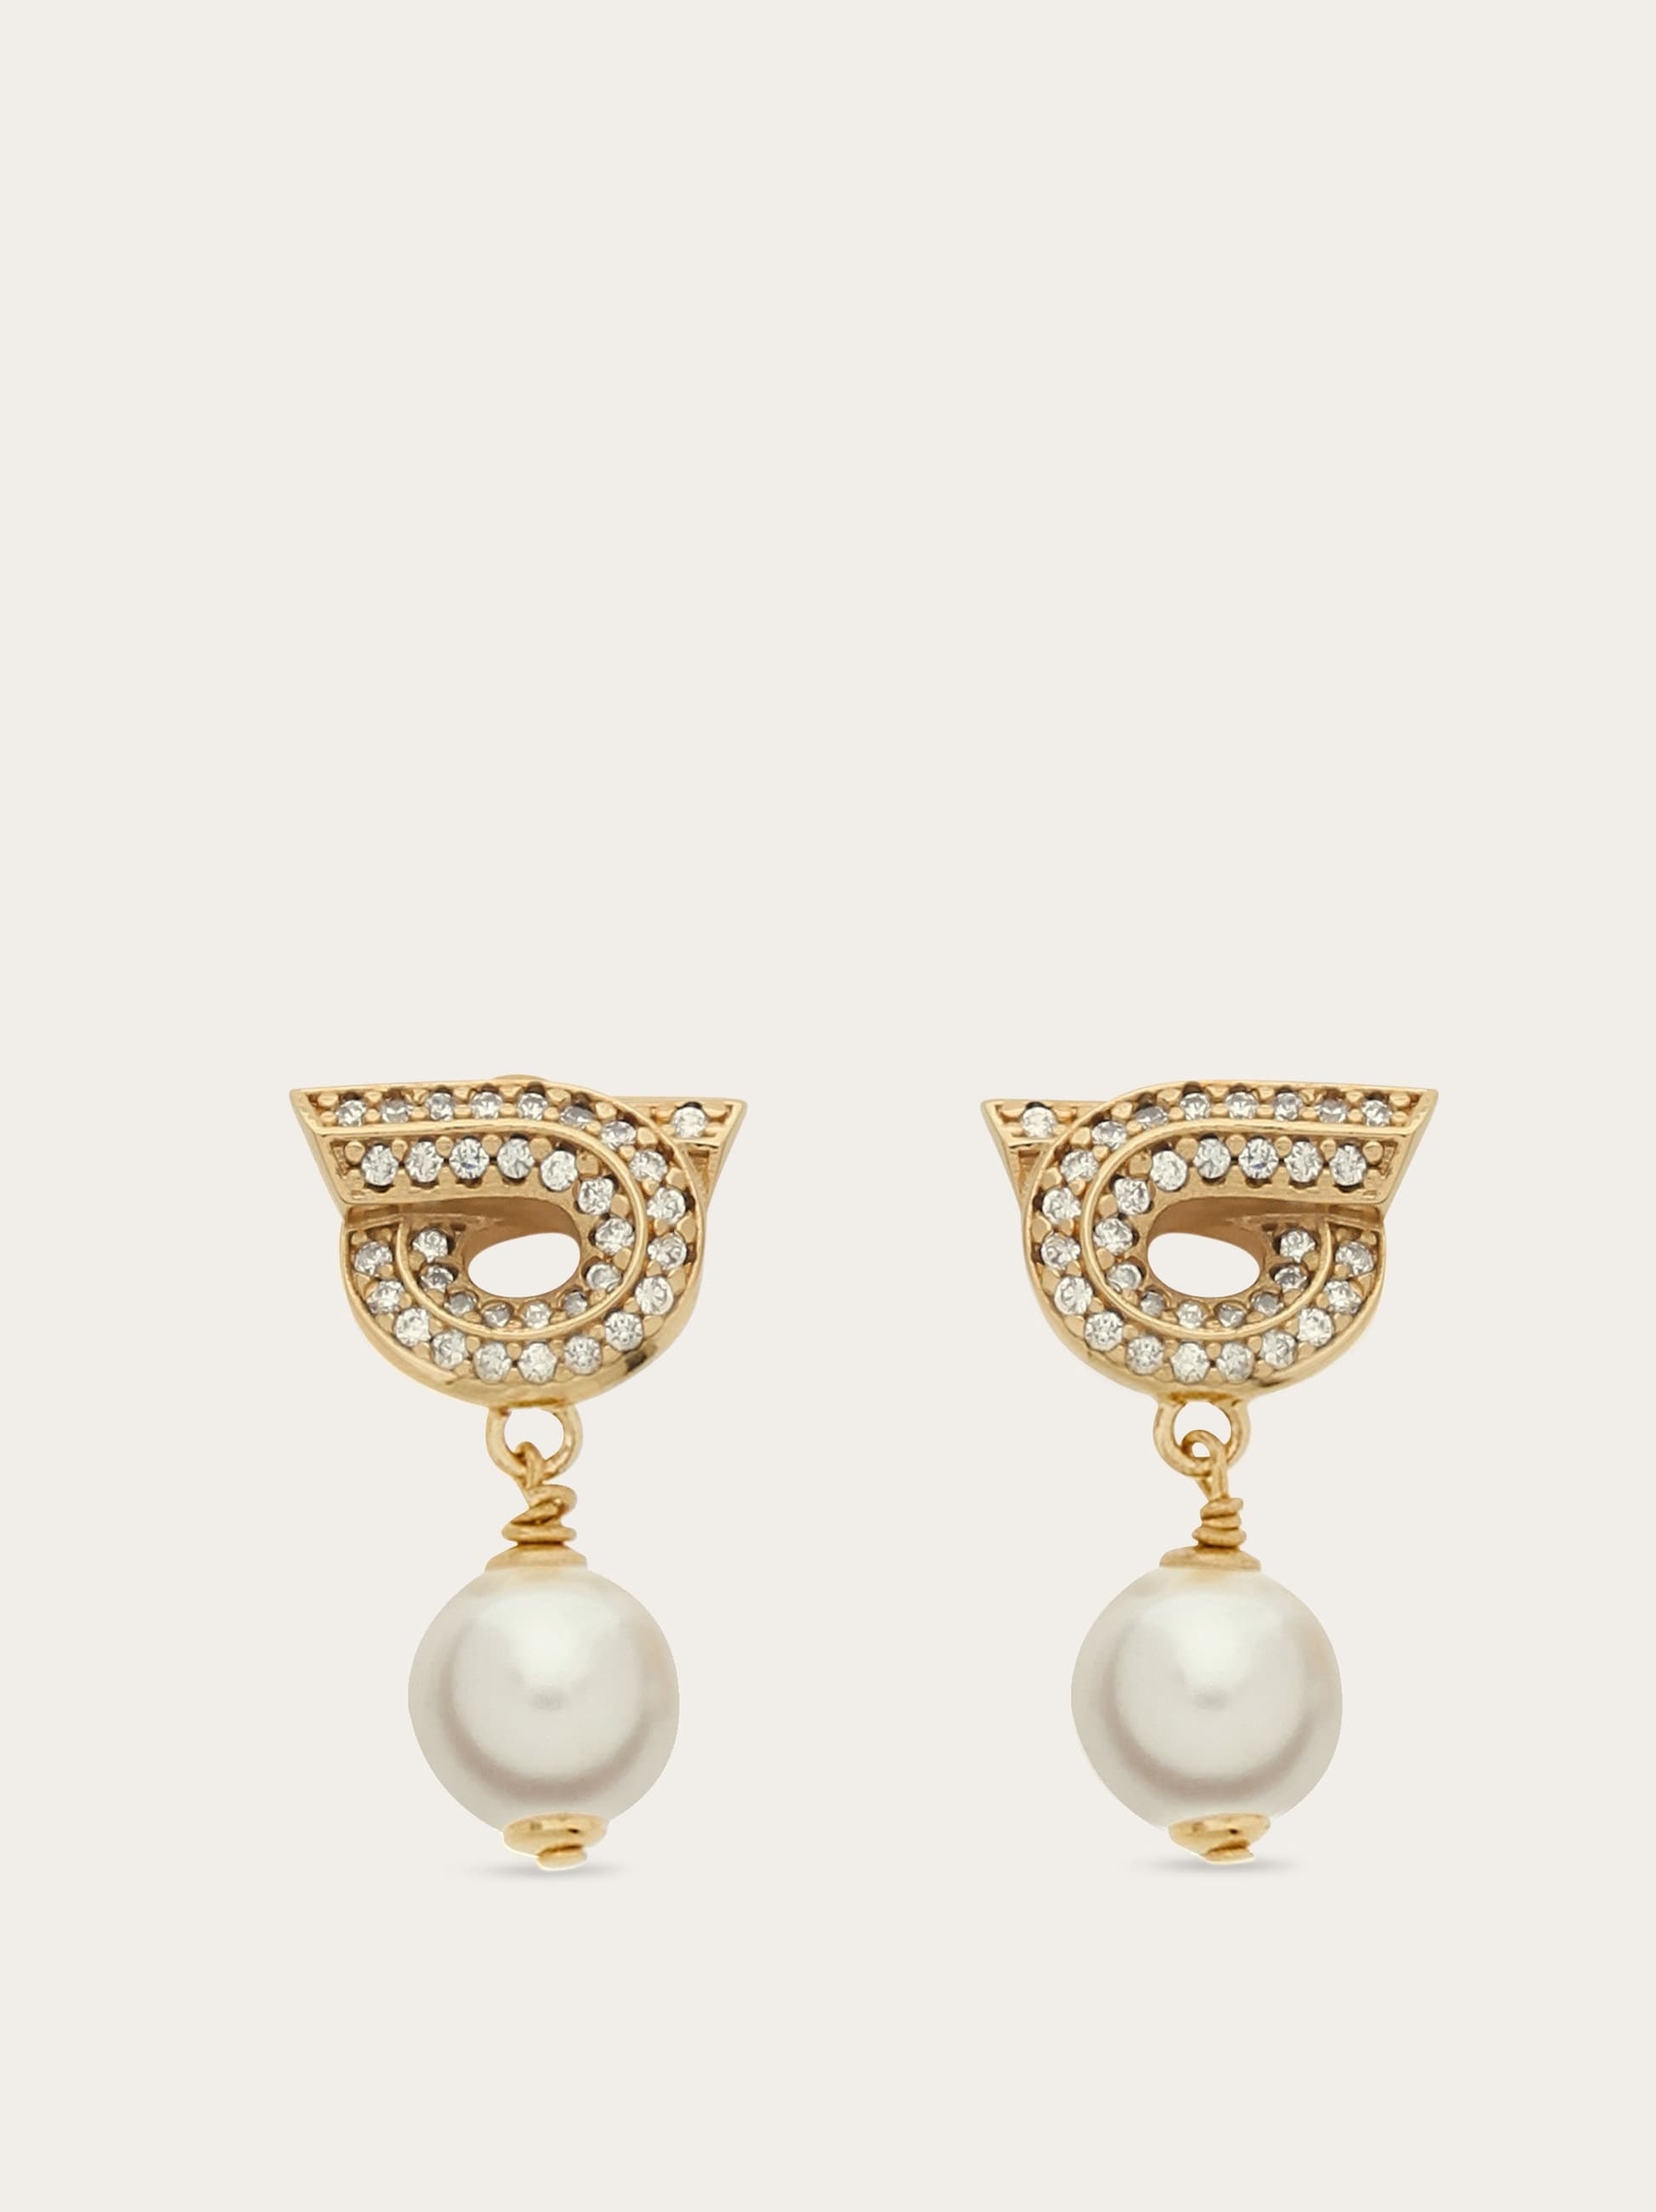 Gancini earrings with pearls and crystals - 1